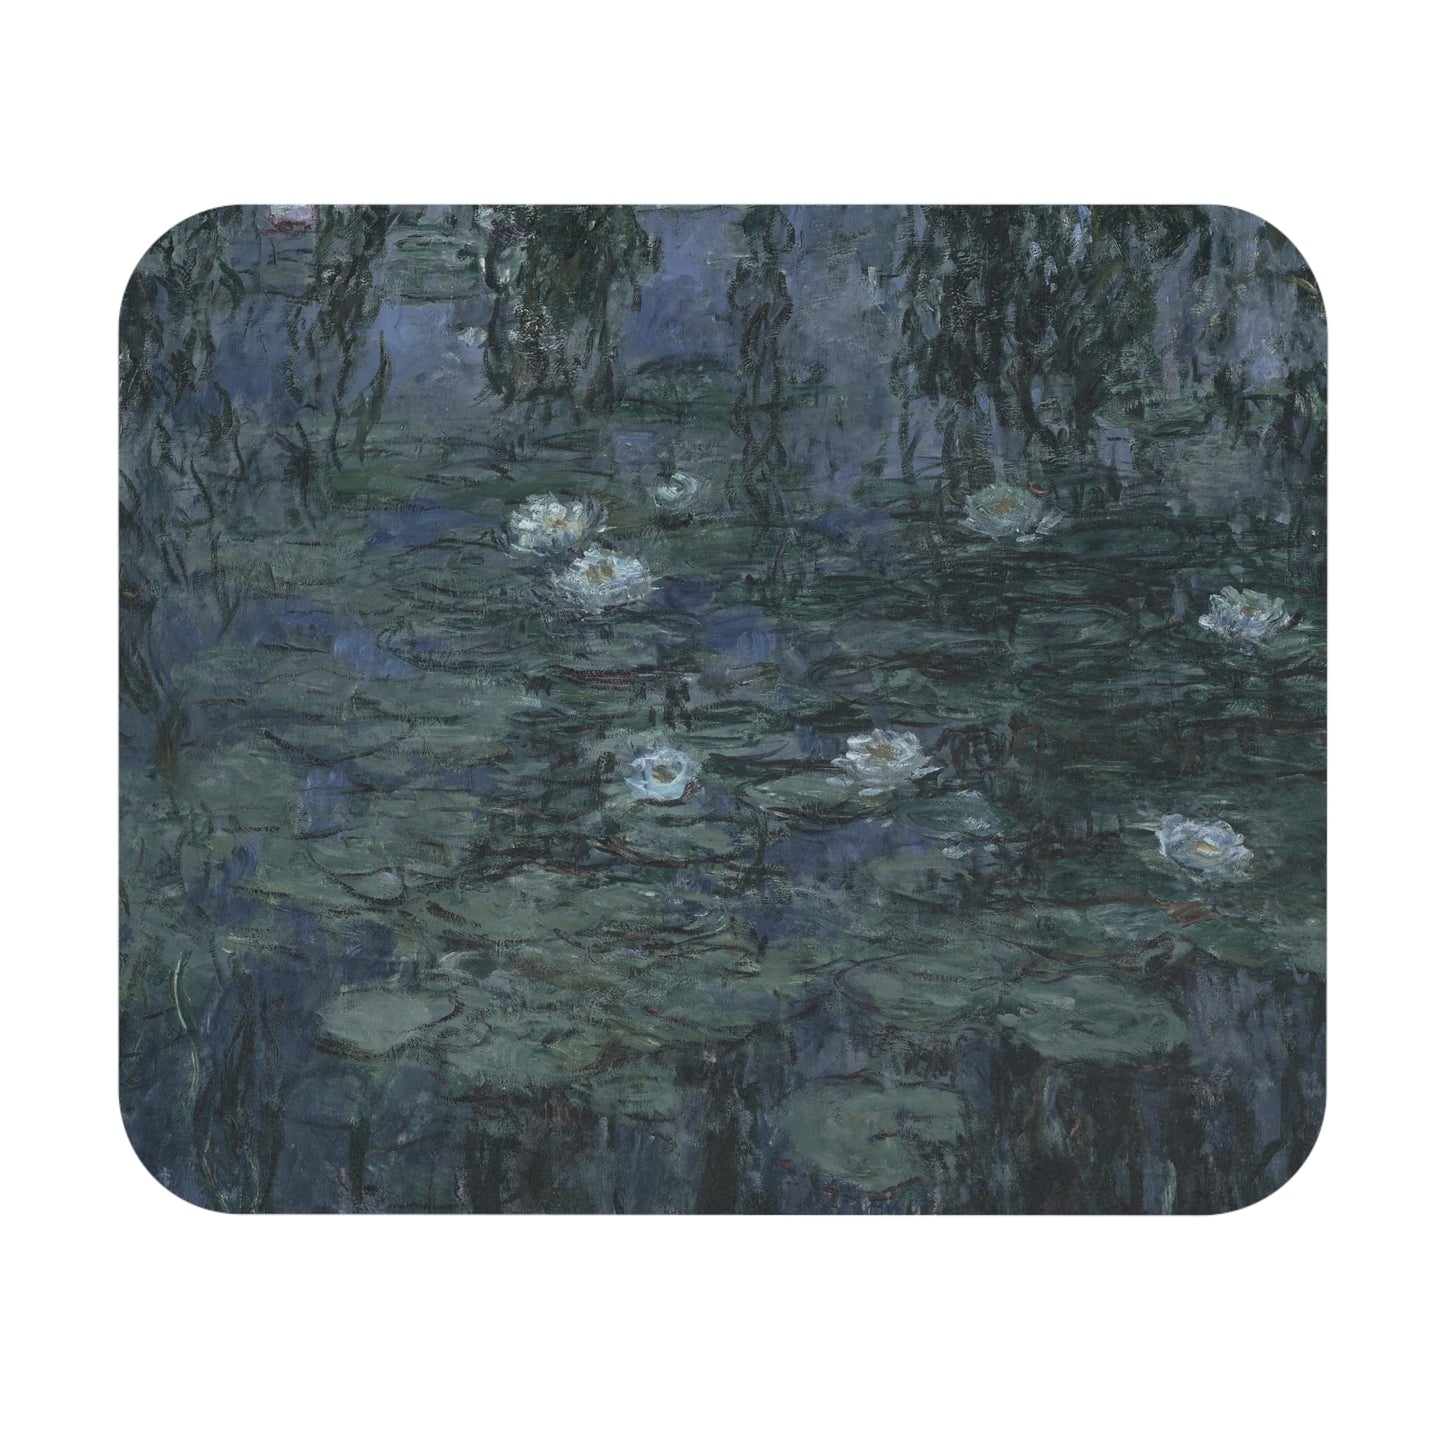 Deep Blue and Green Mouse Pad showcasing Claude Monet design, ideal for desk and office decor.